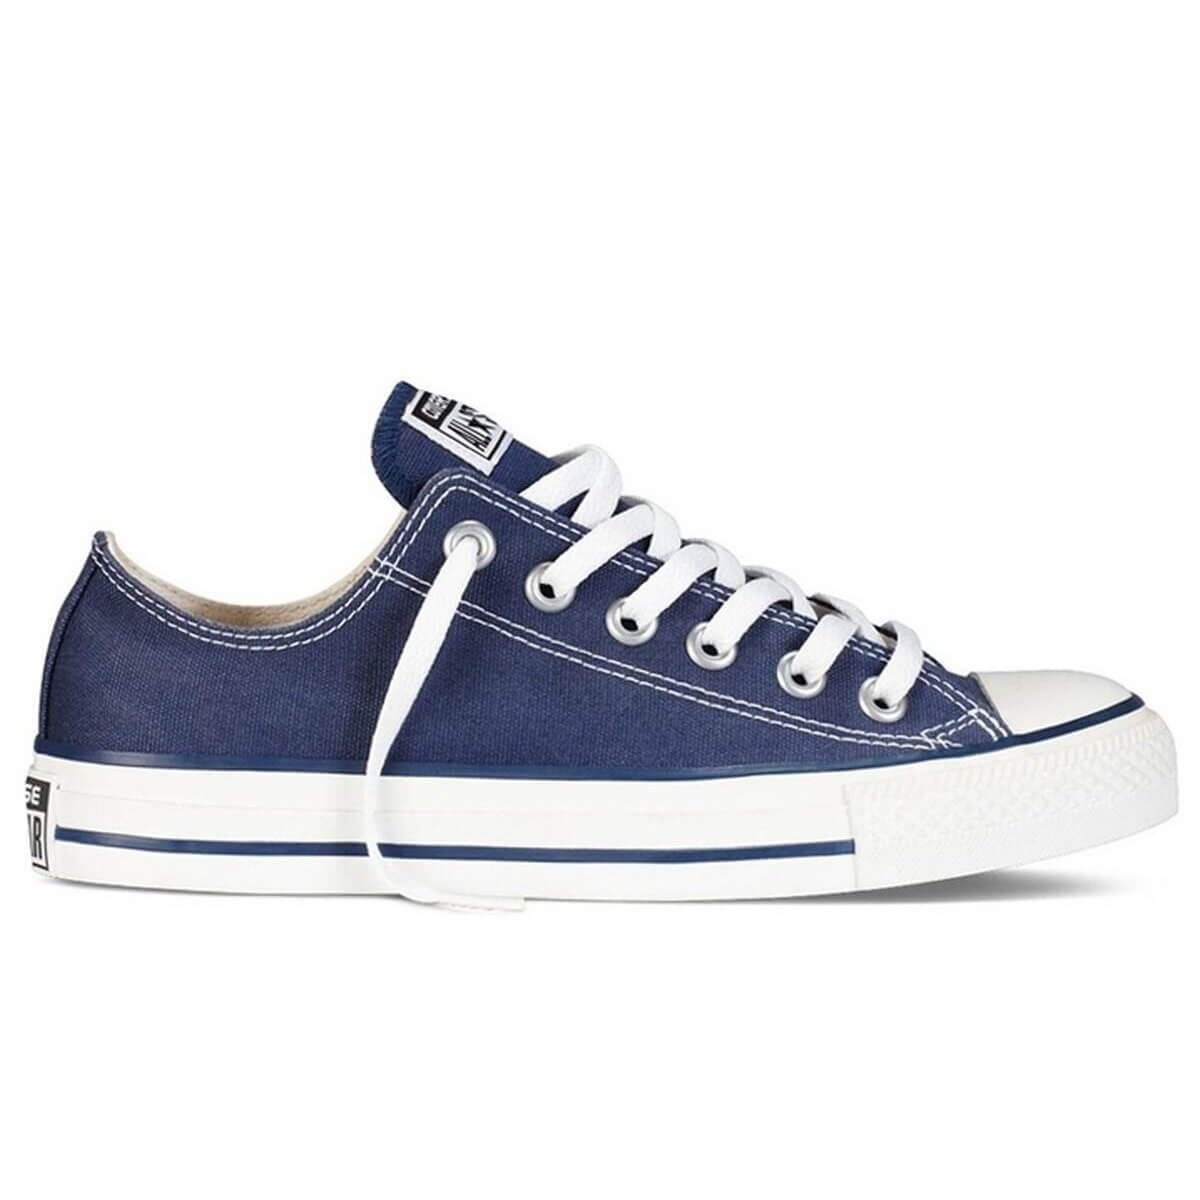 bark risiko Engager Converse Chuck Taylor All Star Unisex OX Navy Textile Sneakers 11.5 M/13.5  W - Walmart.com